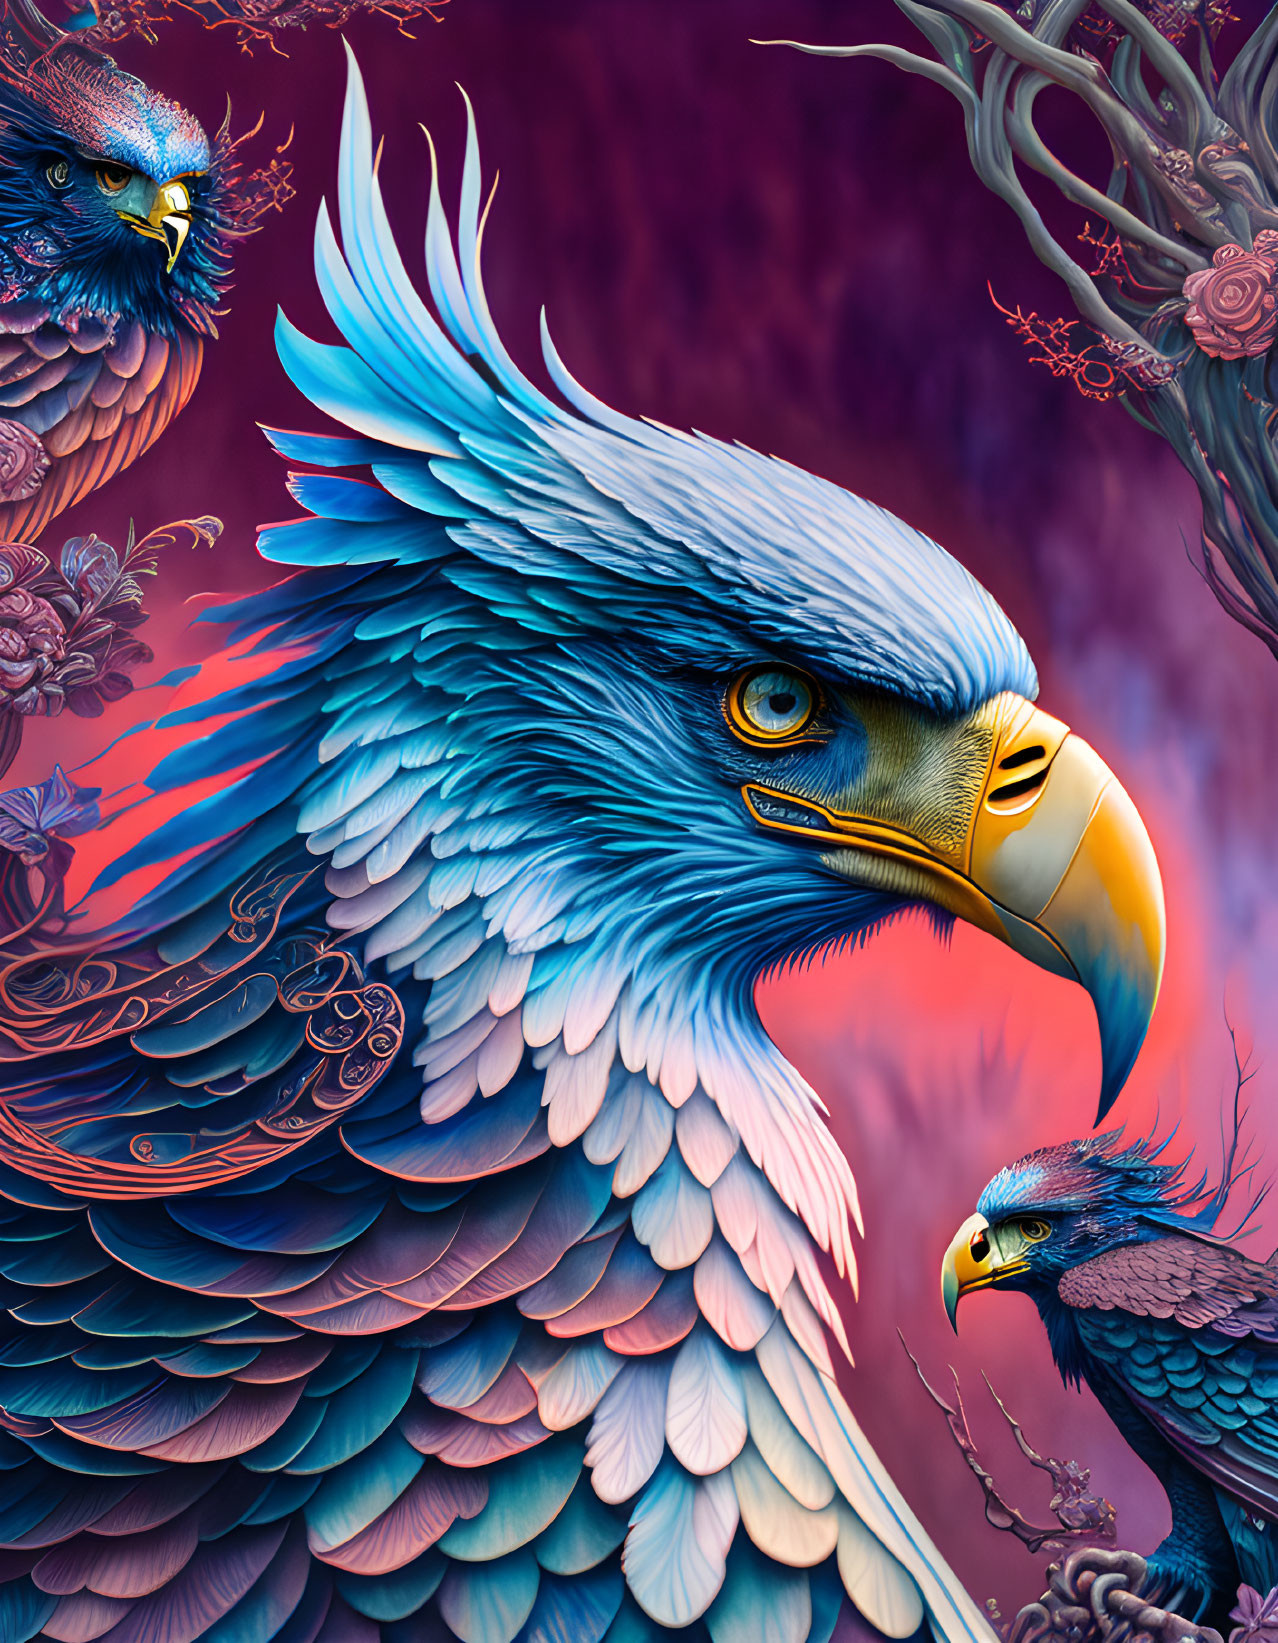 Colorful digital artwork featuring stylized eagles and floral elements on a purple and pink backdrop